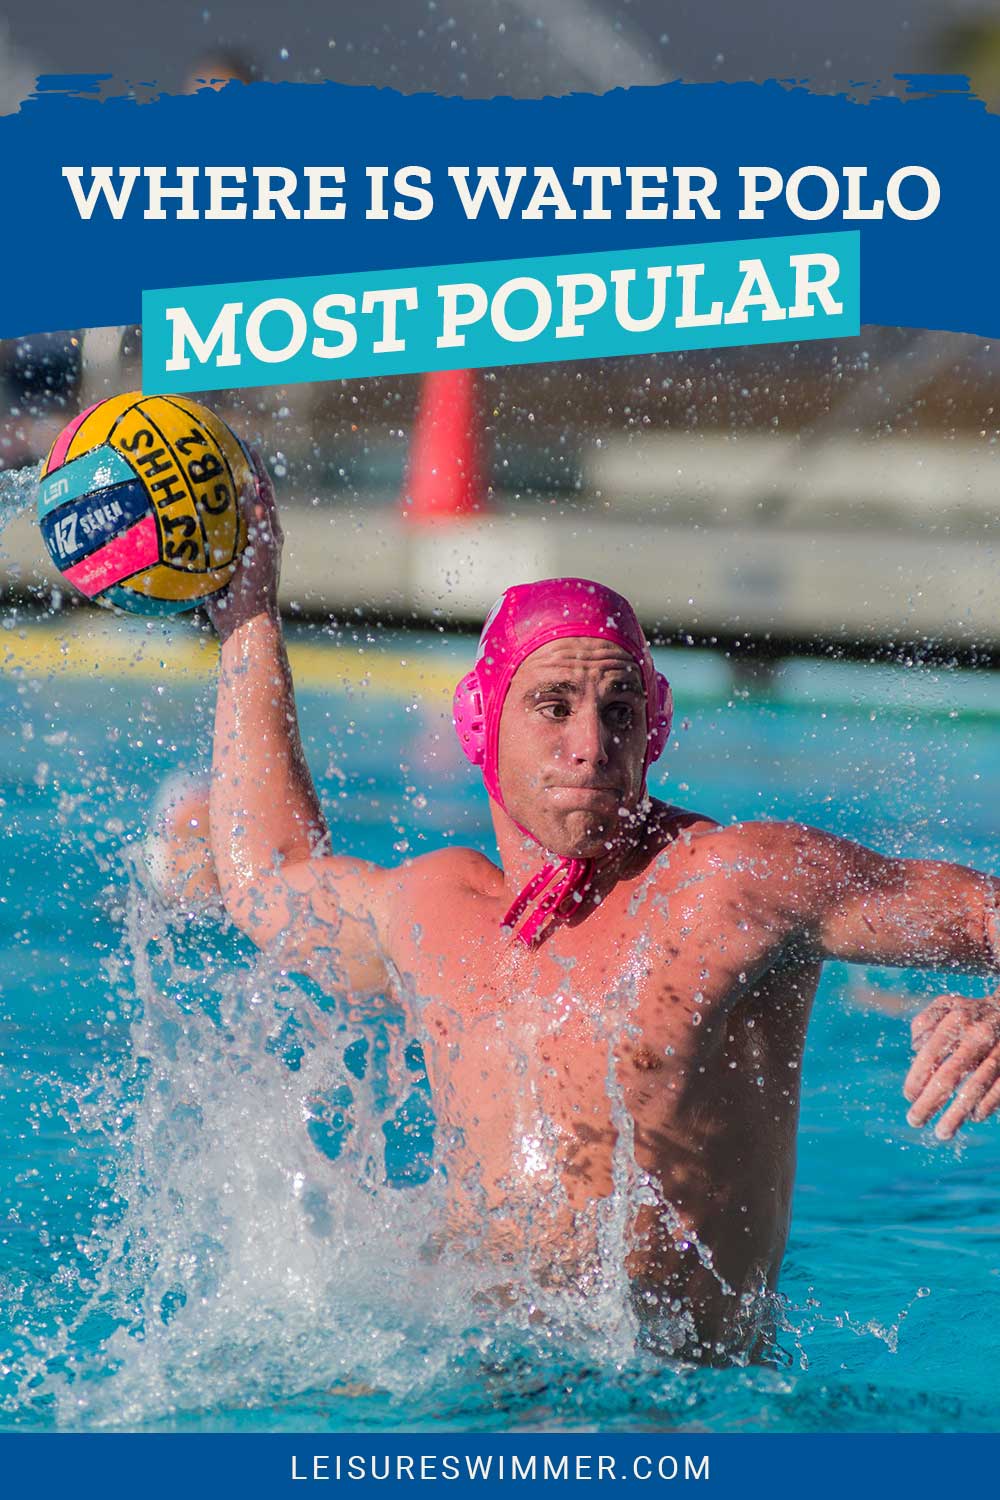 Man playing Water Polo throwing a ball - Where Is Water Polo Most Popular